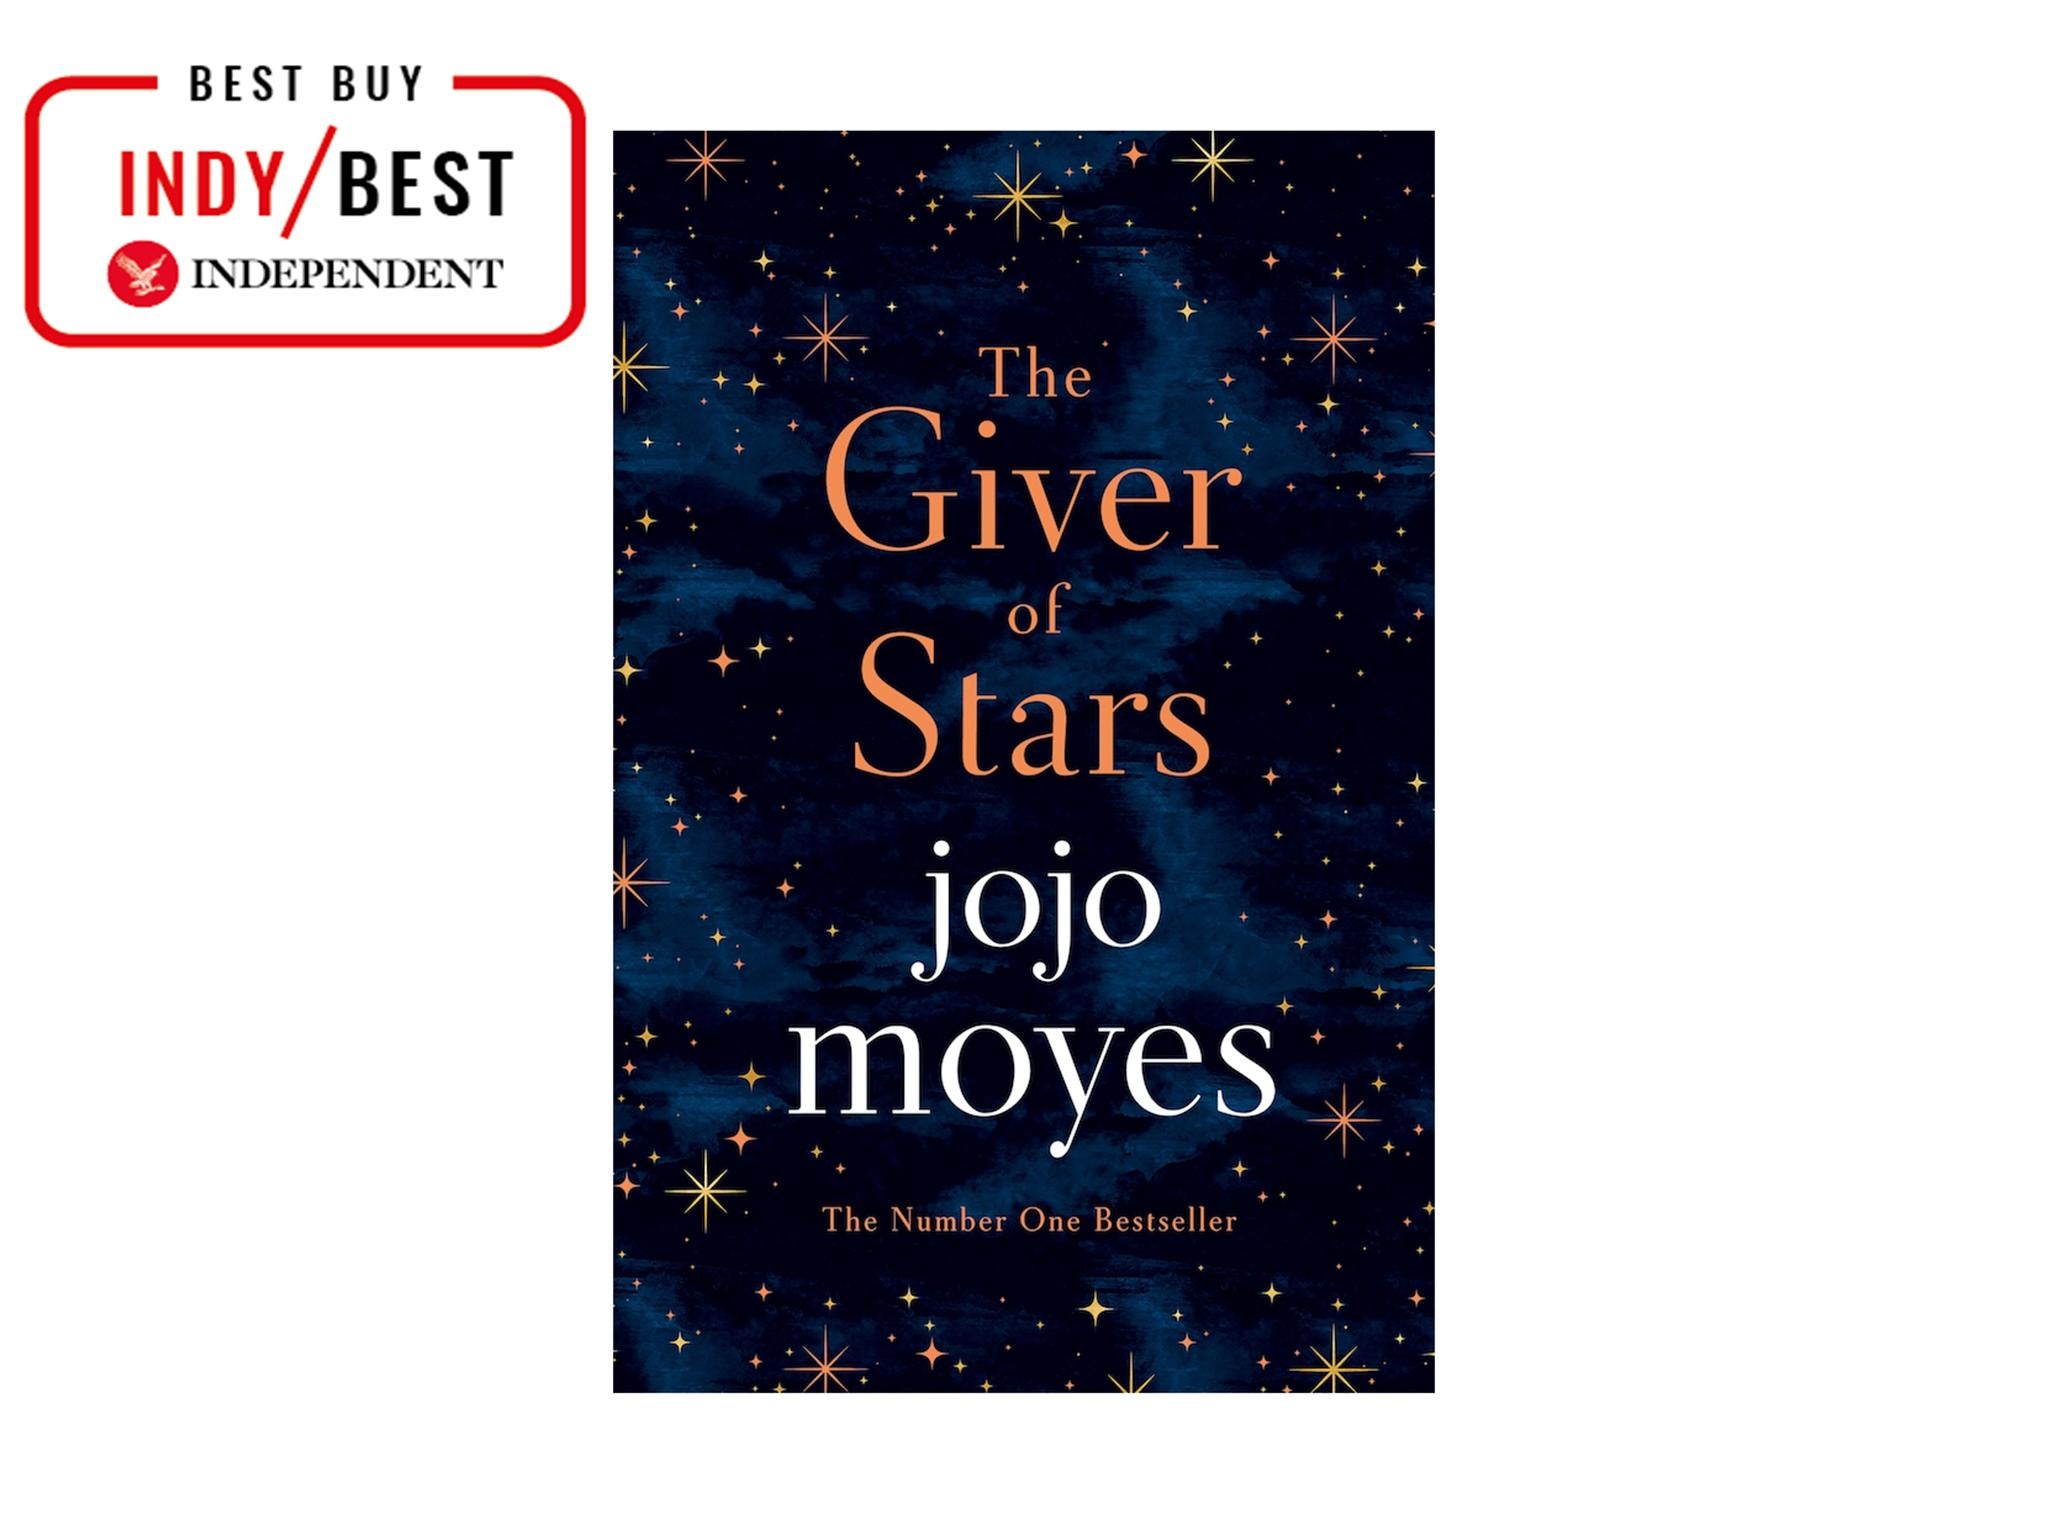 indybest-the-giver-of-stars-jacket-copy.jpg